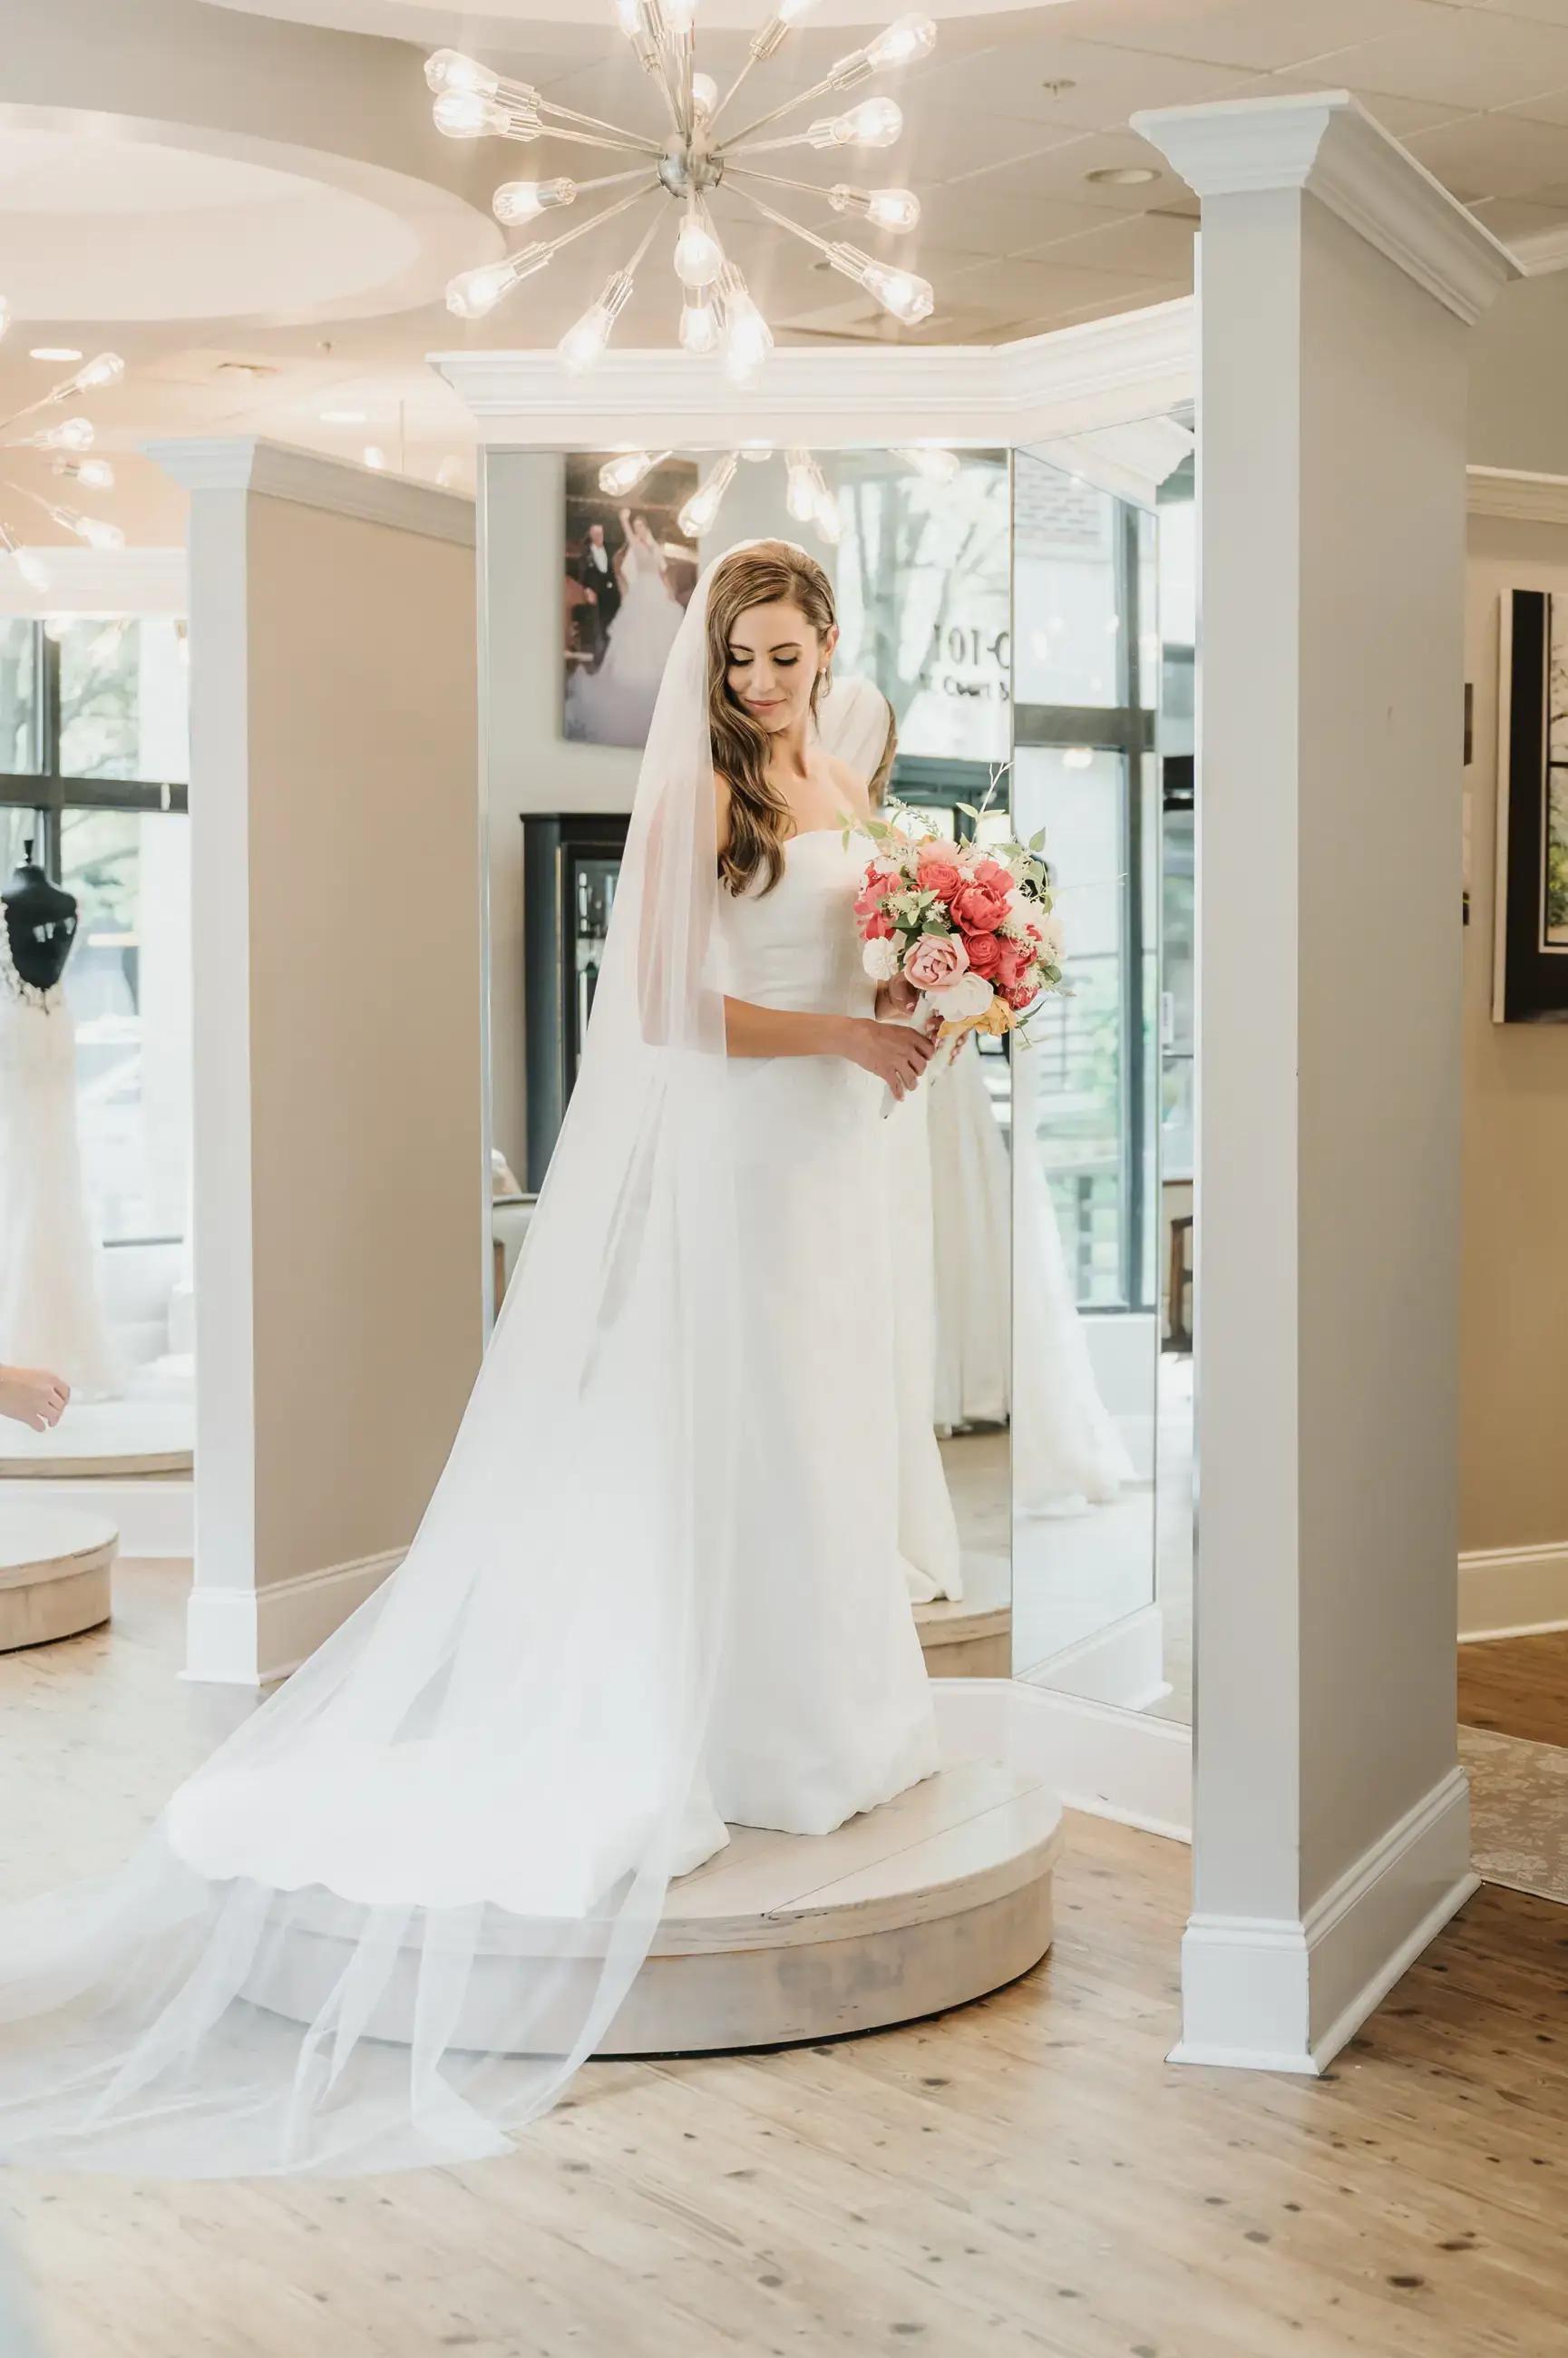 Your Guide to an Unforgettable Bridal Experience! Image